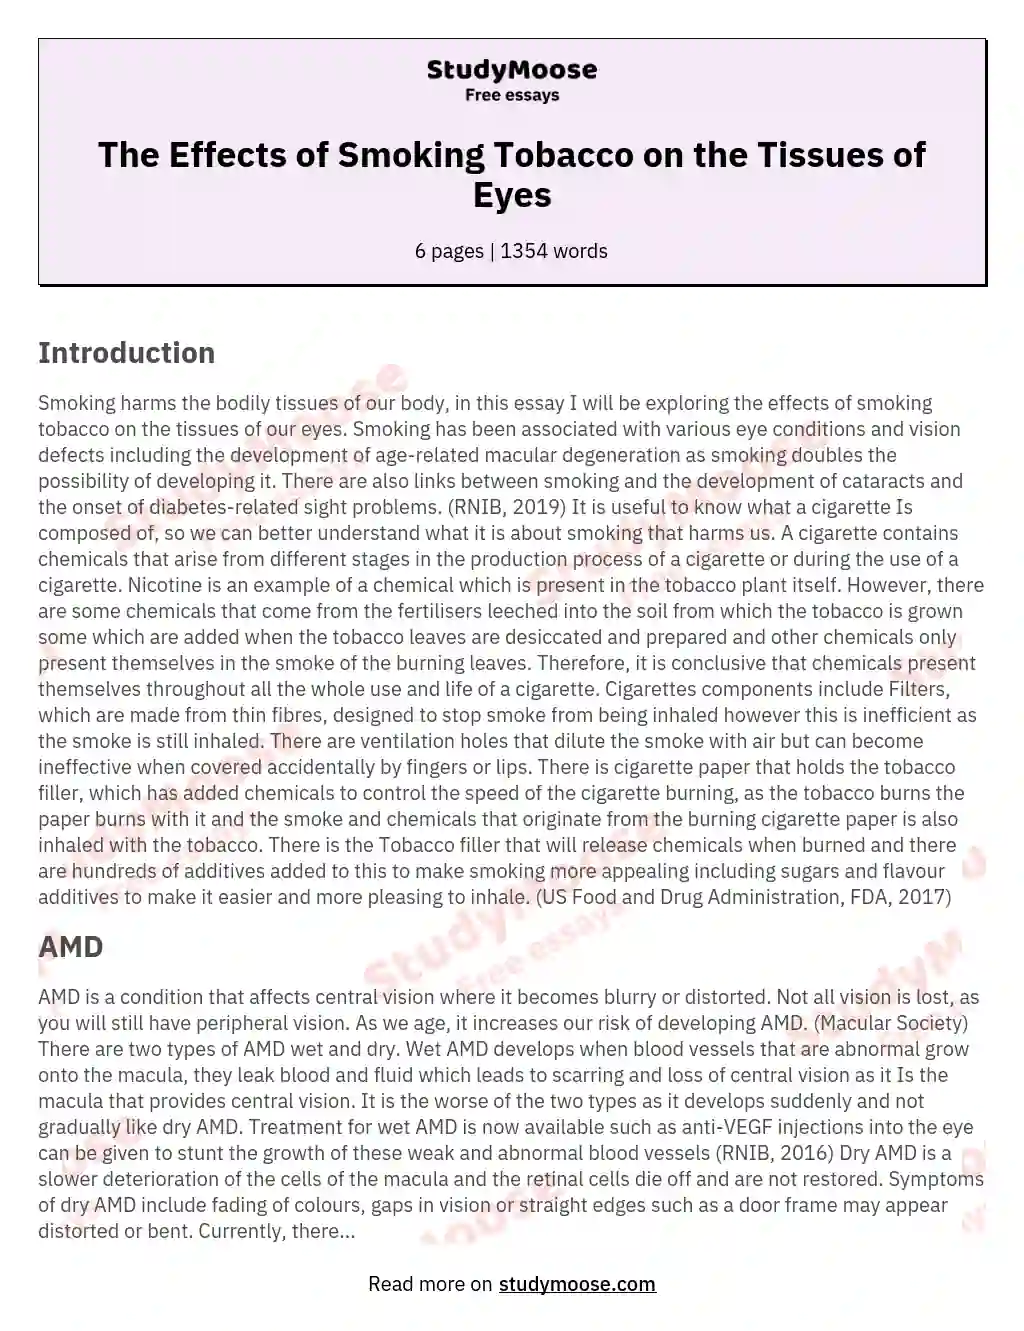 The Effects of Smoking Tobacco on the Tissues of Eyes essay